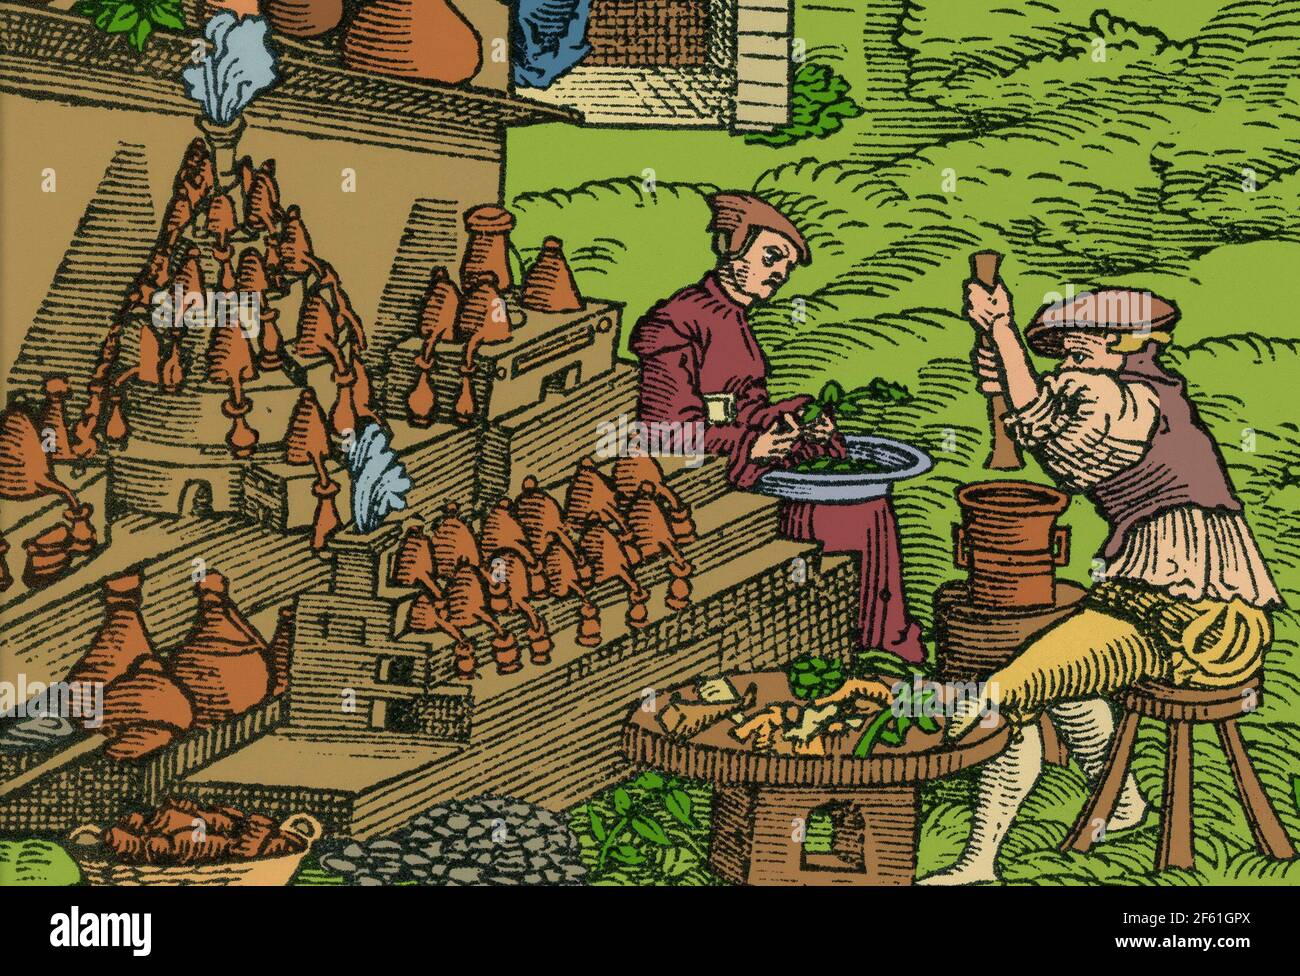 Medical Herb Cultivation, 16th Century Stock Photo